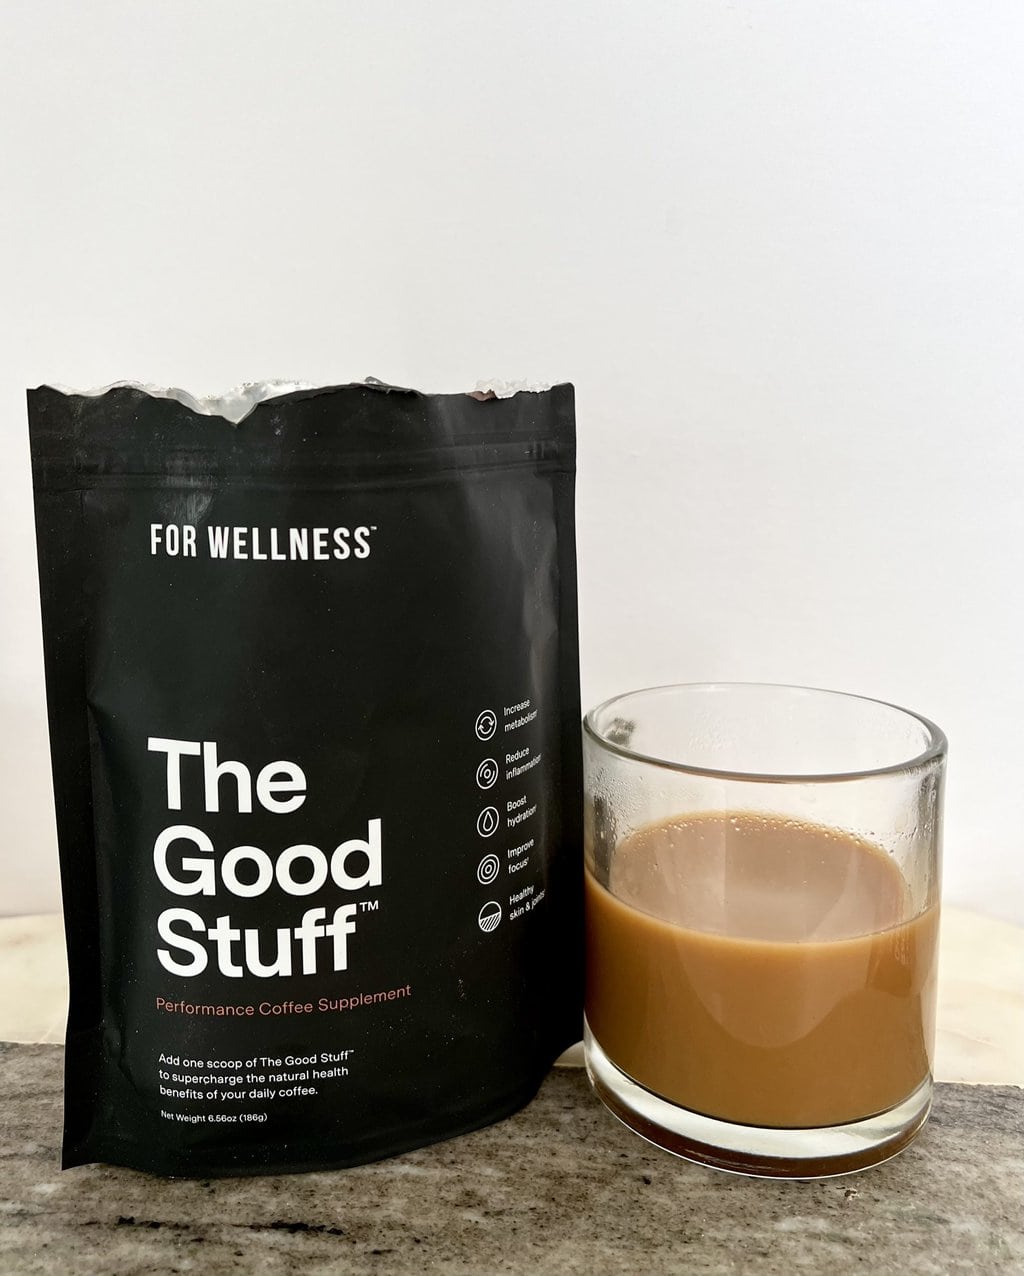 For Wellness The Good Stuff package of coffee additives stands next to a brewed cup of liquid